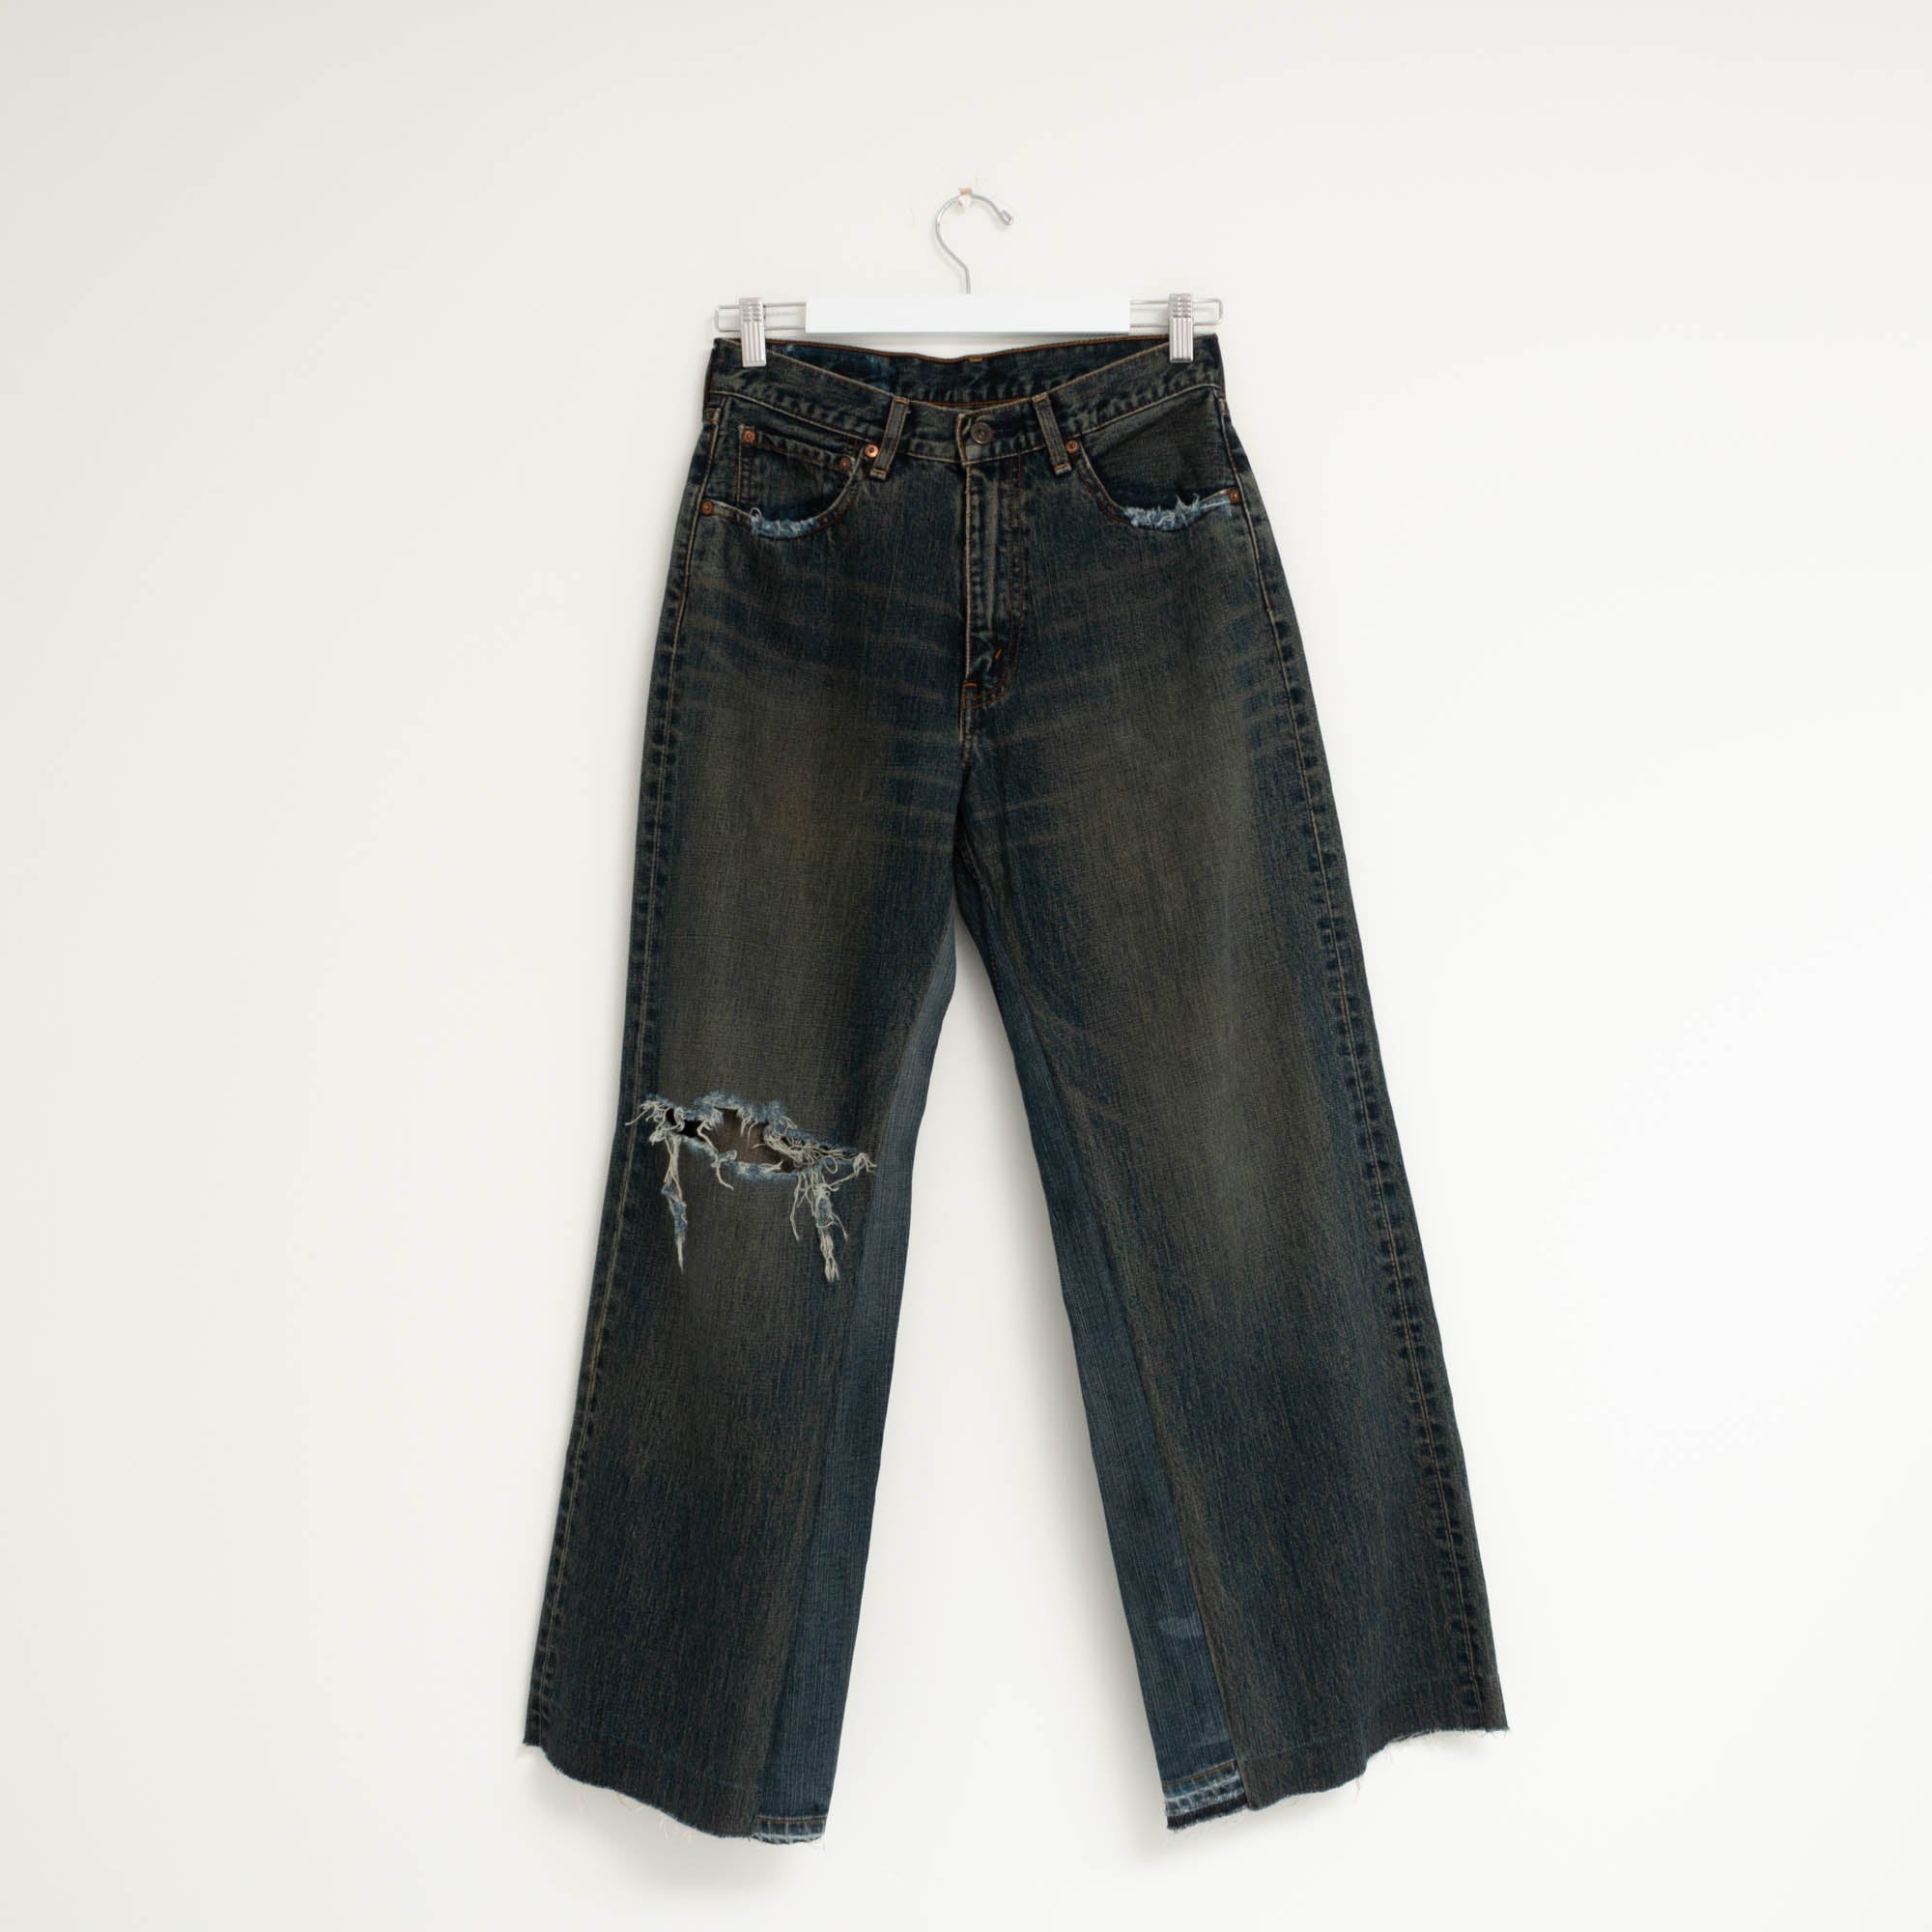 "FLARE" Jeans W29 L31